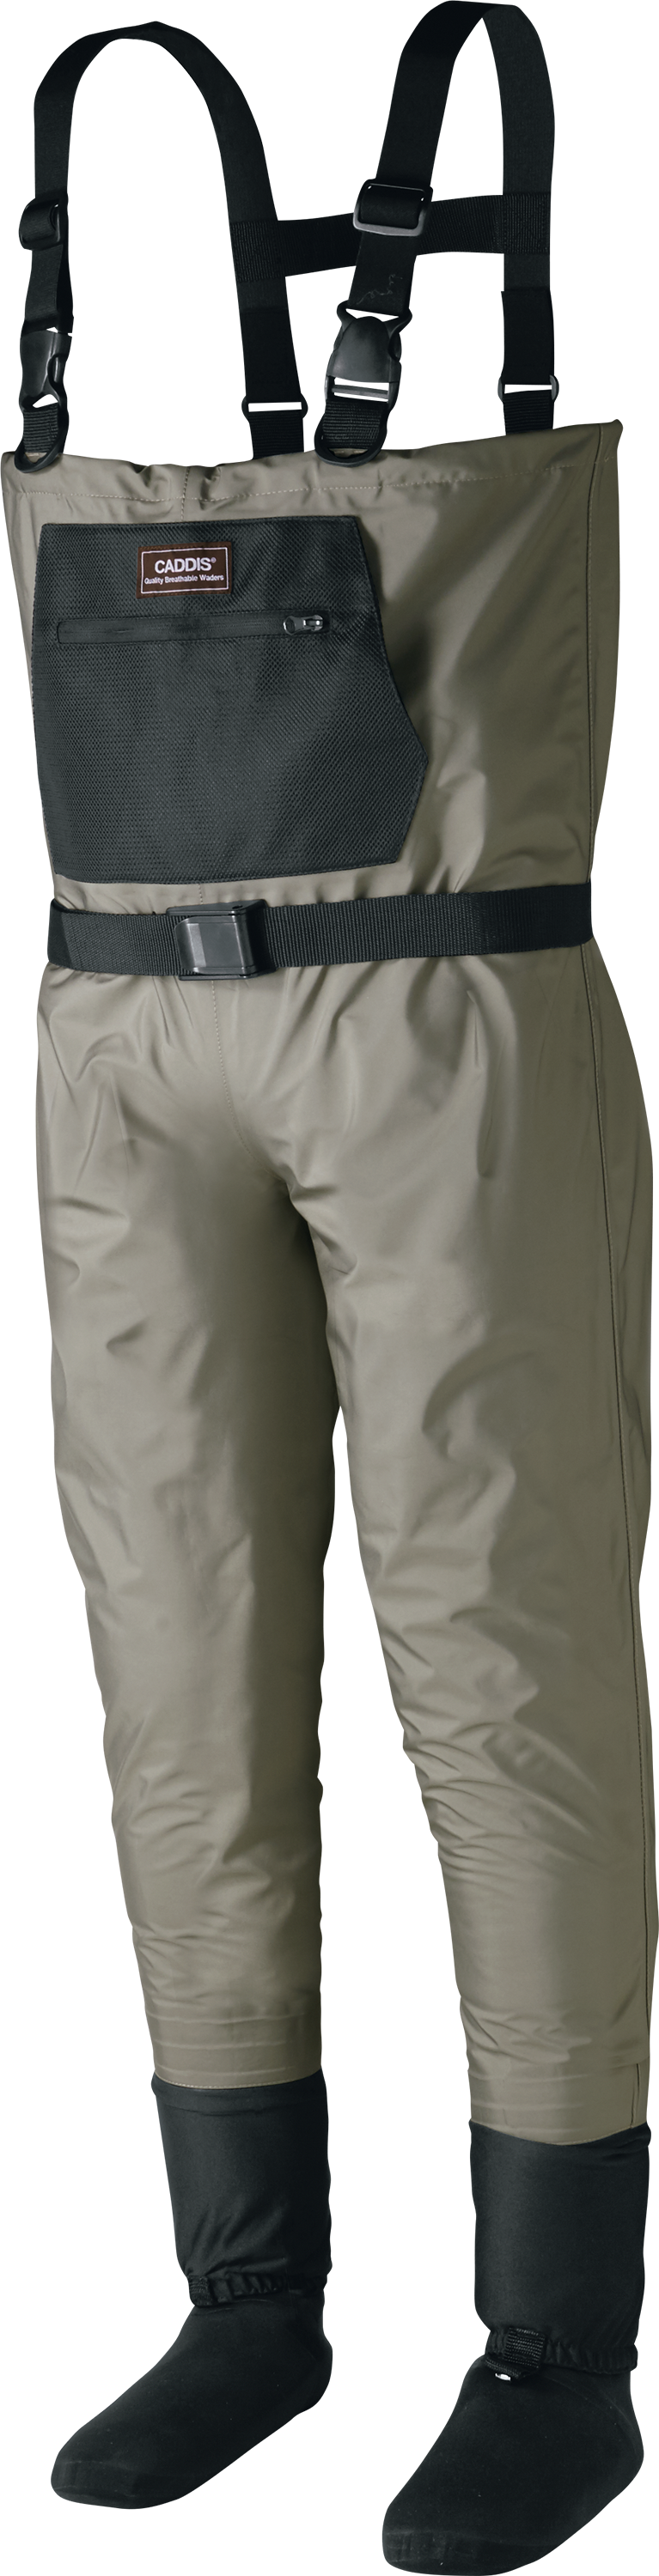 Caddis Breathable Stockingfoot Fishing Waders for Men - M Stout